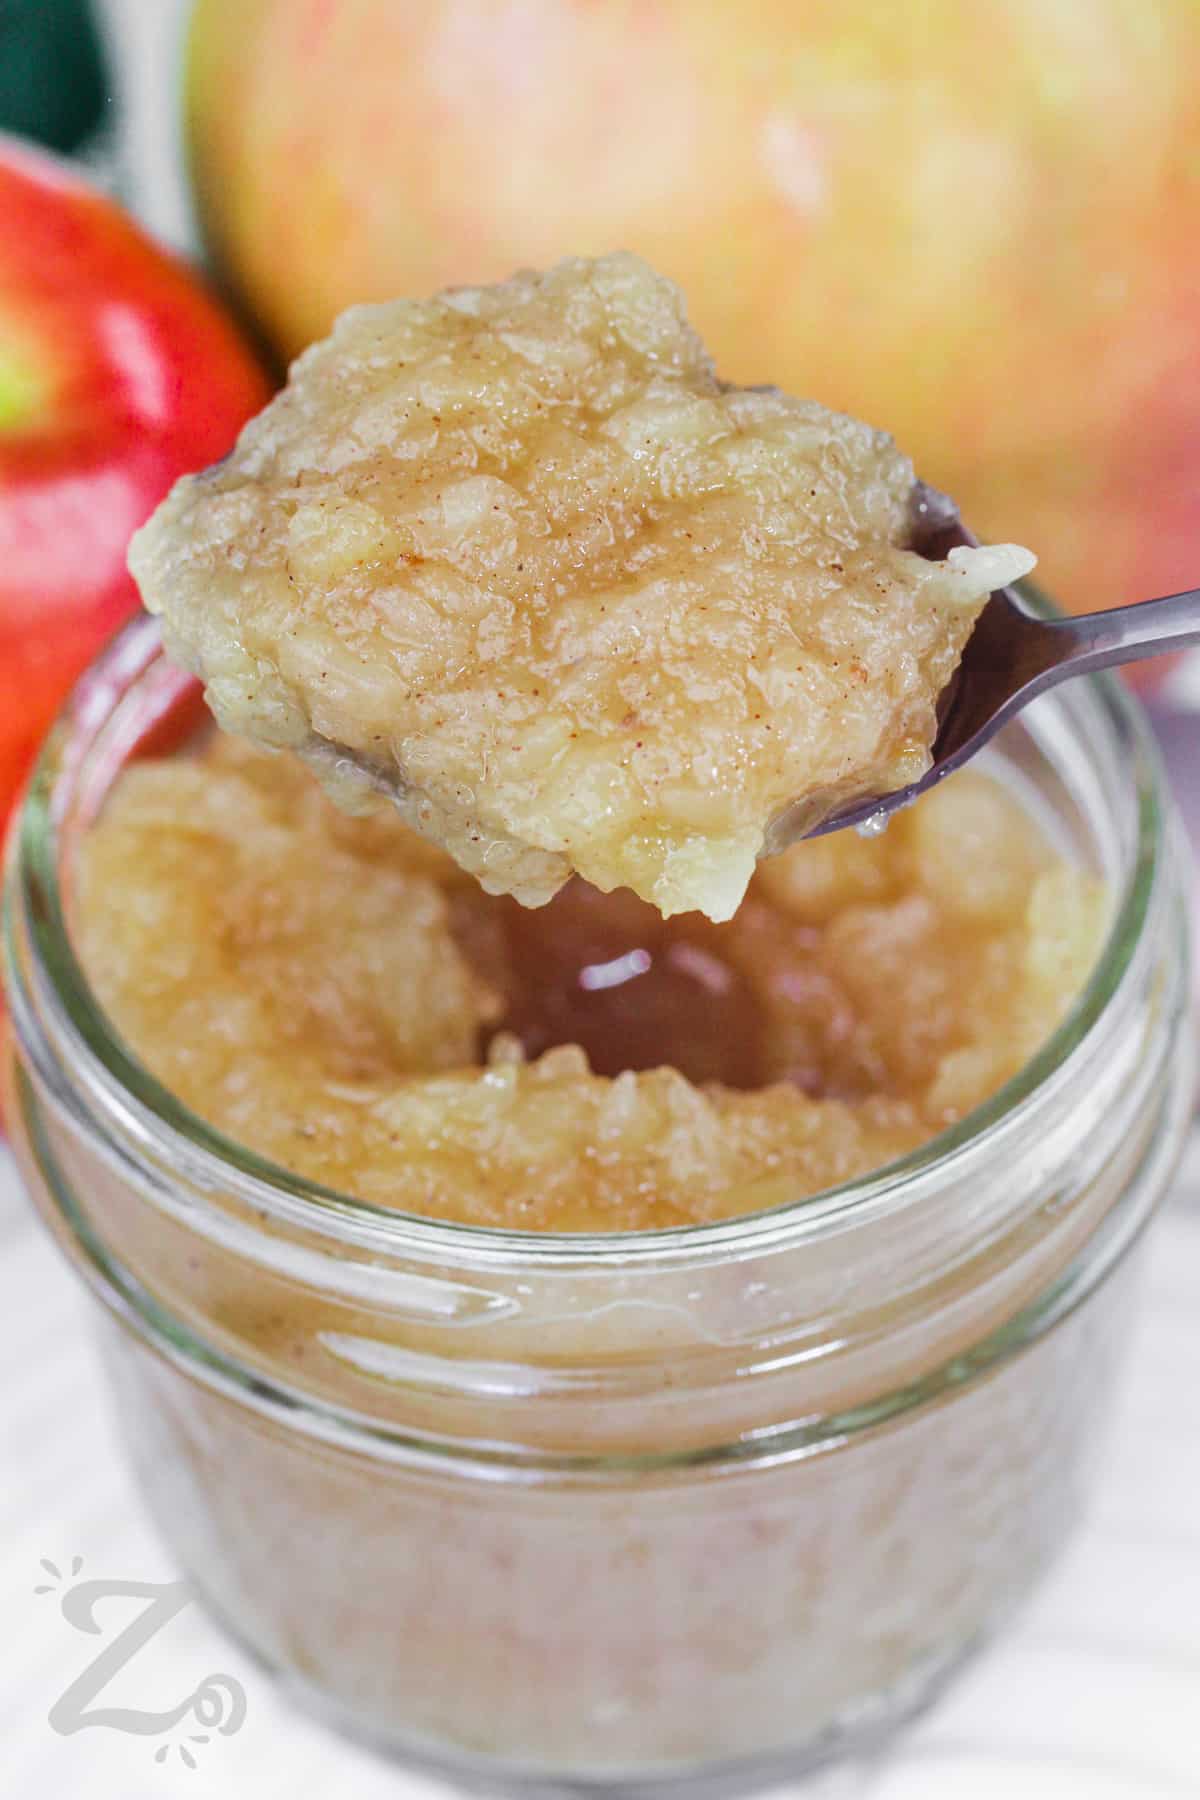 apple sauce being scooped out of a jar